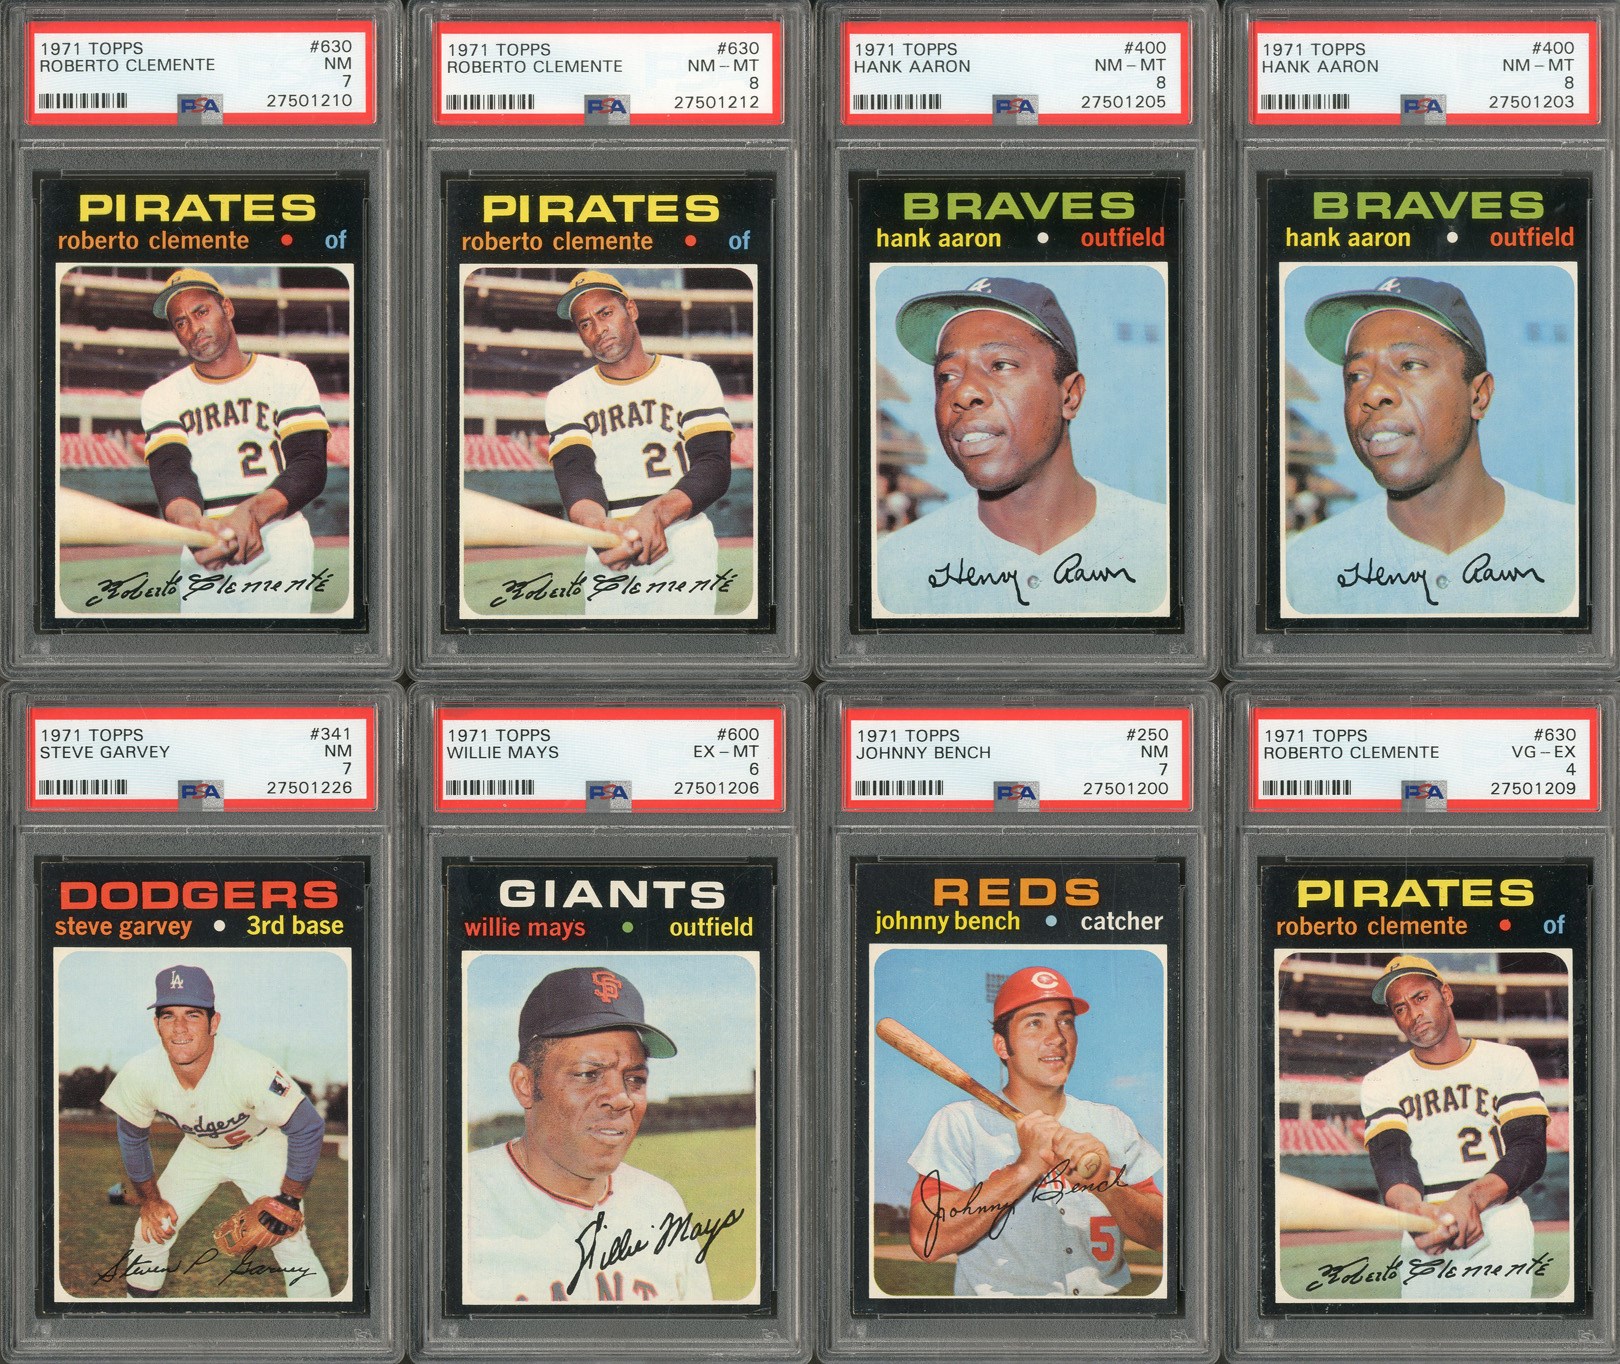 1971 Topps PSA Graded Collection (8 Cards with PSA 8 Clemente)